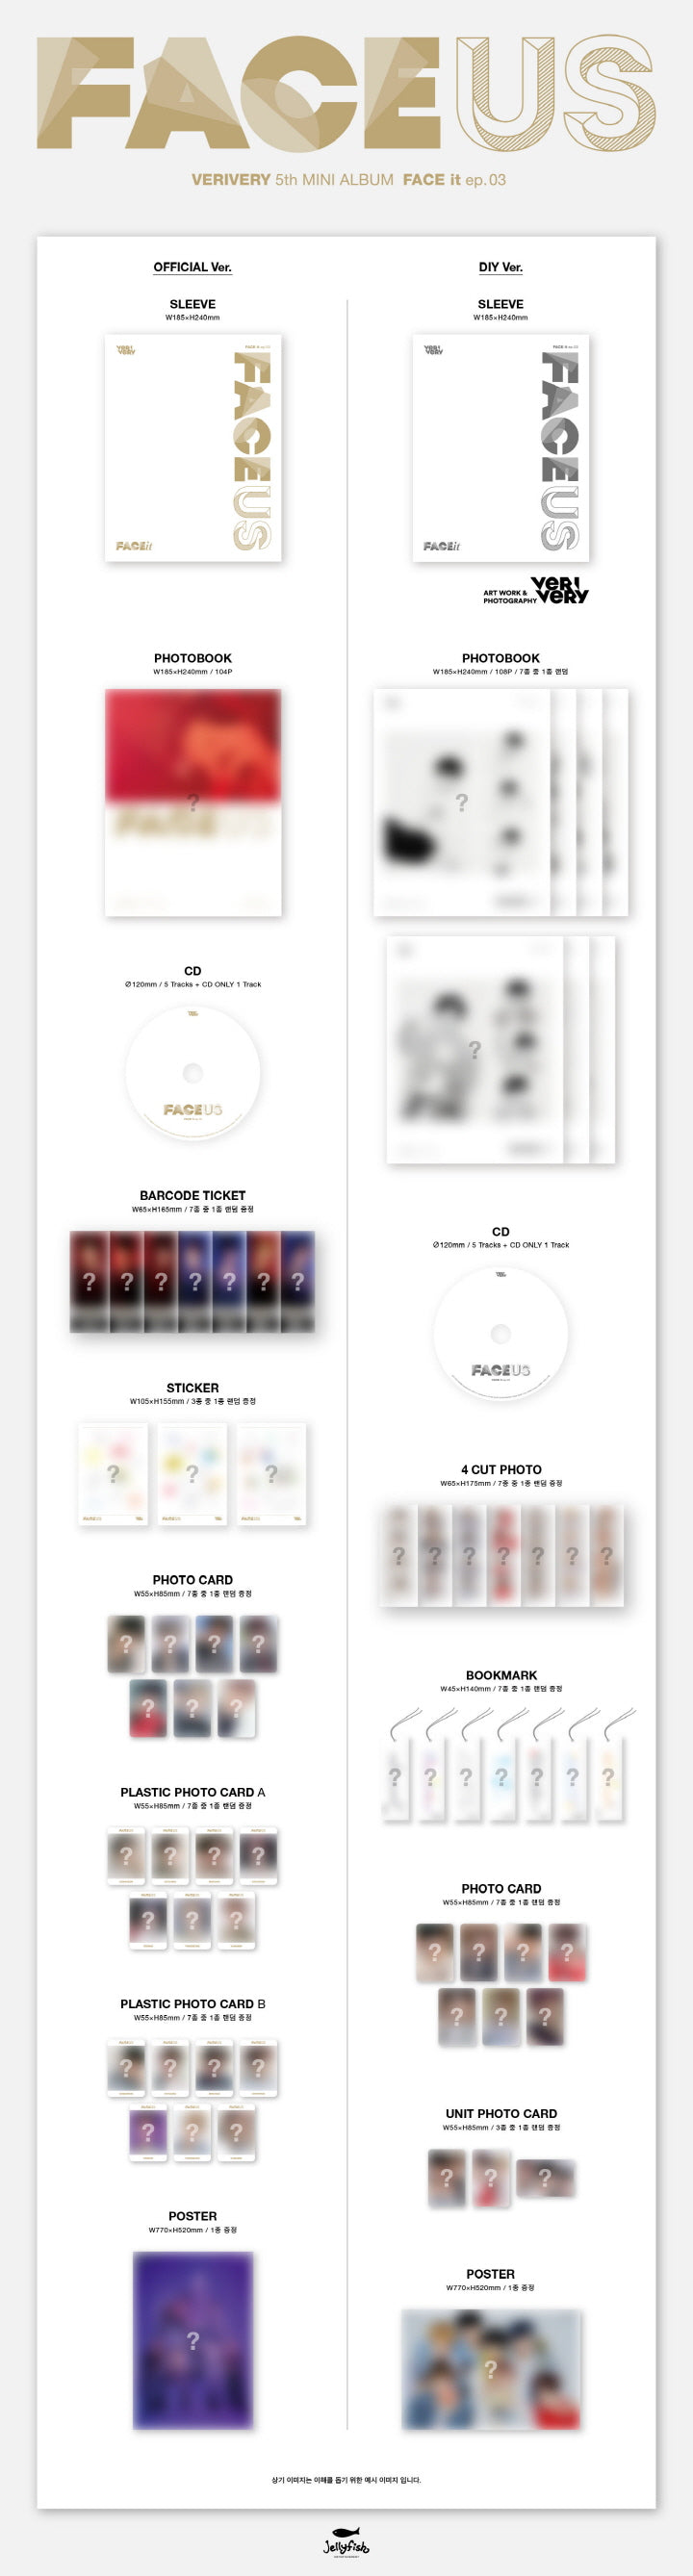 Official Version

1 CD
1 Photo Book (104 pages)
1 Barcode Ticket (random out of 7 types)
1 Sticker (random out of 3 types)...